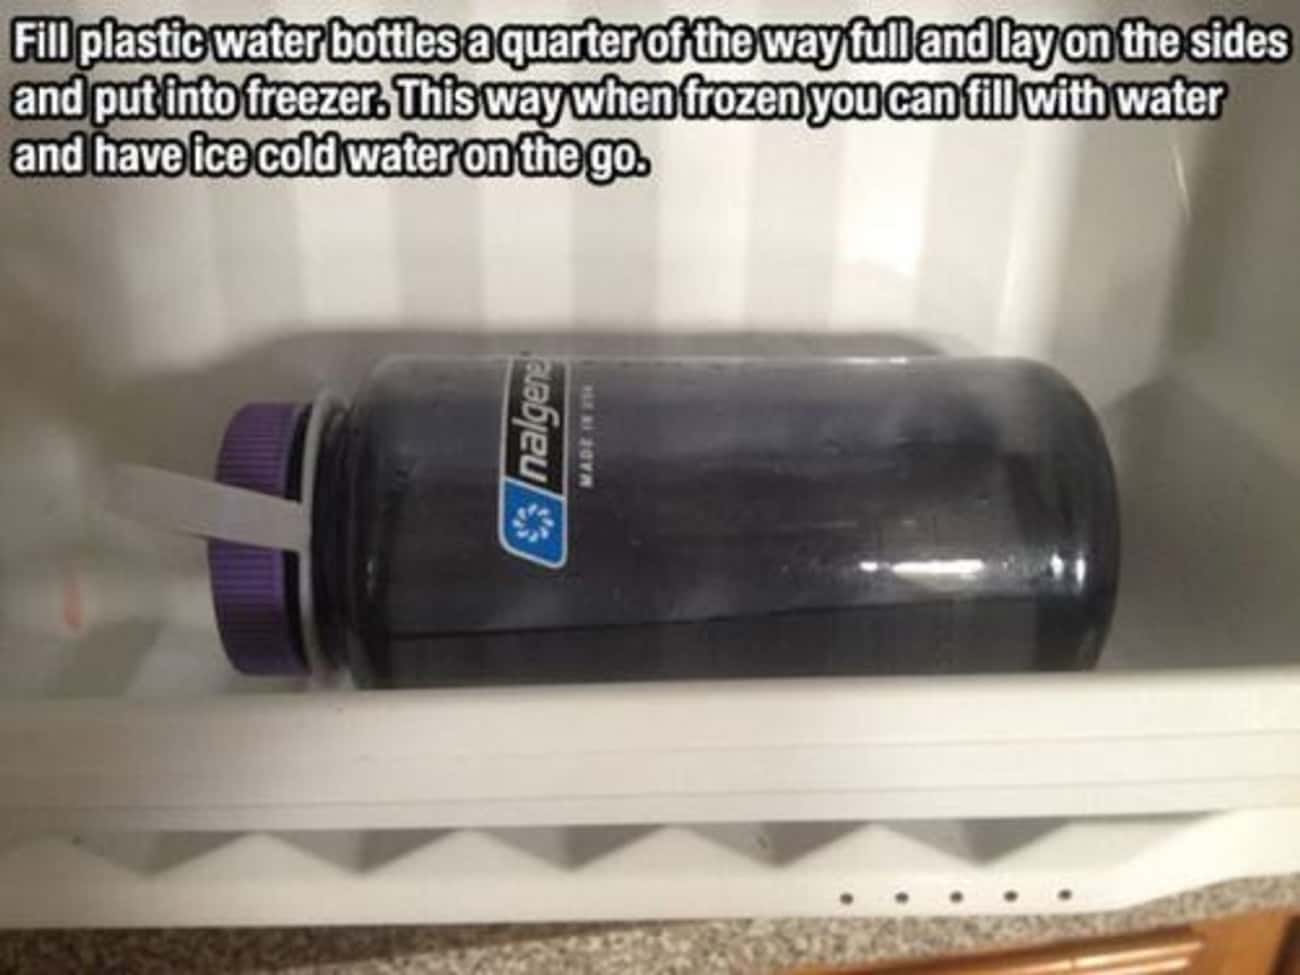 How To Have Ice Water On The Go